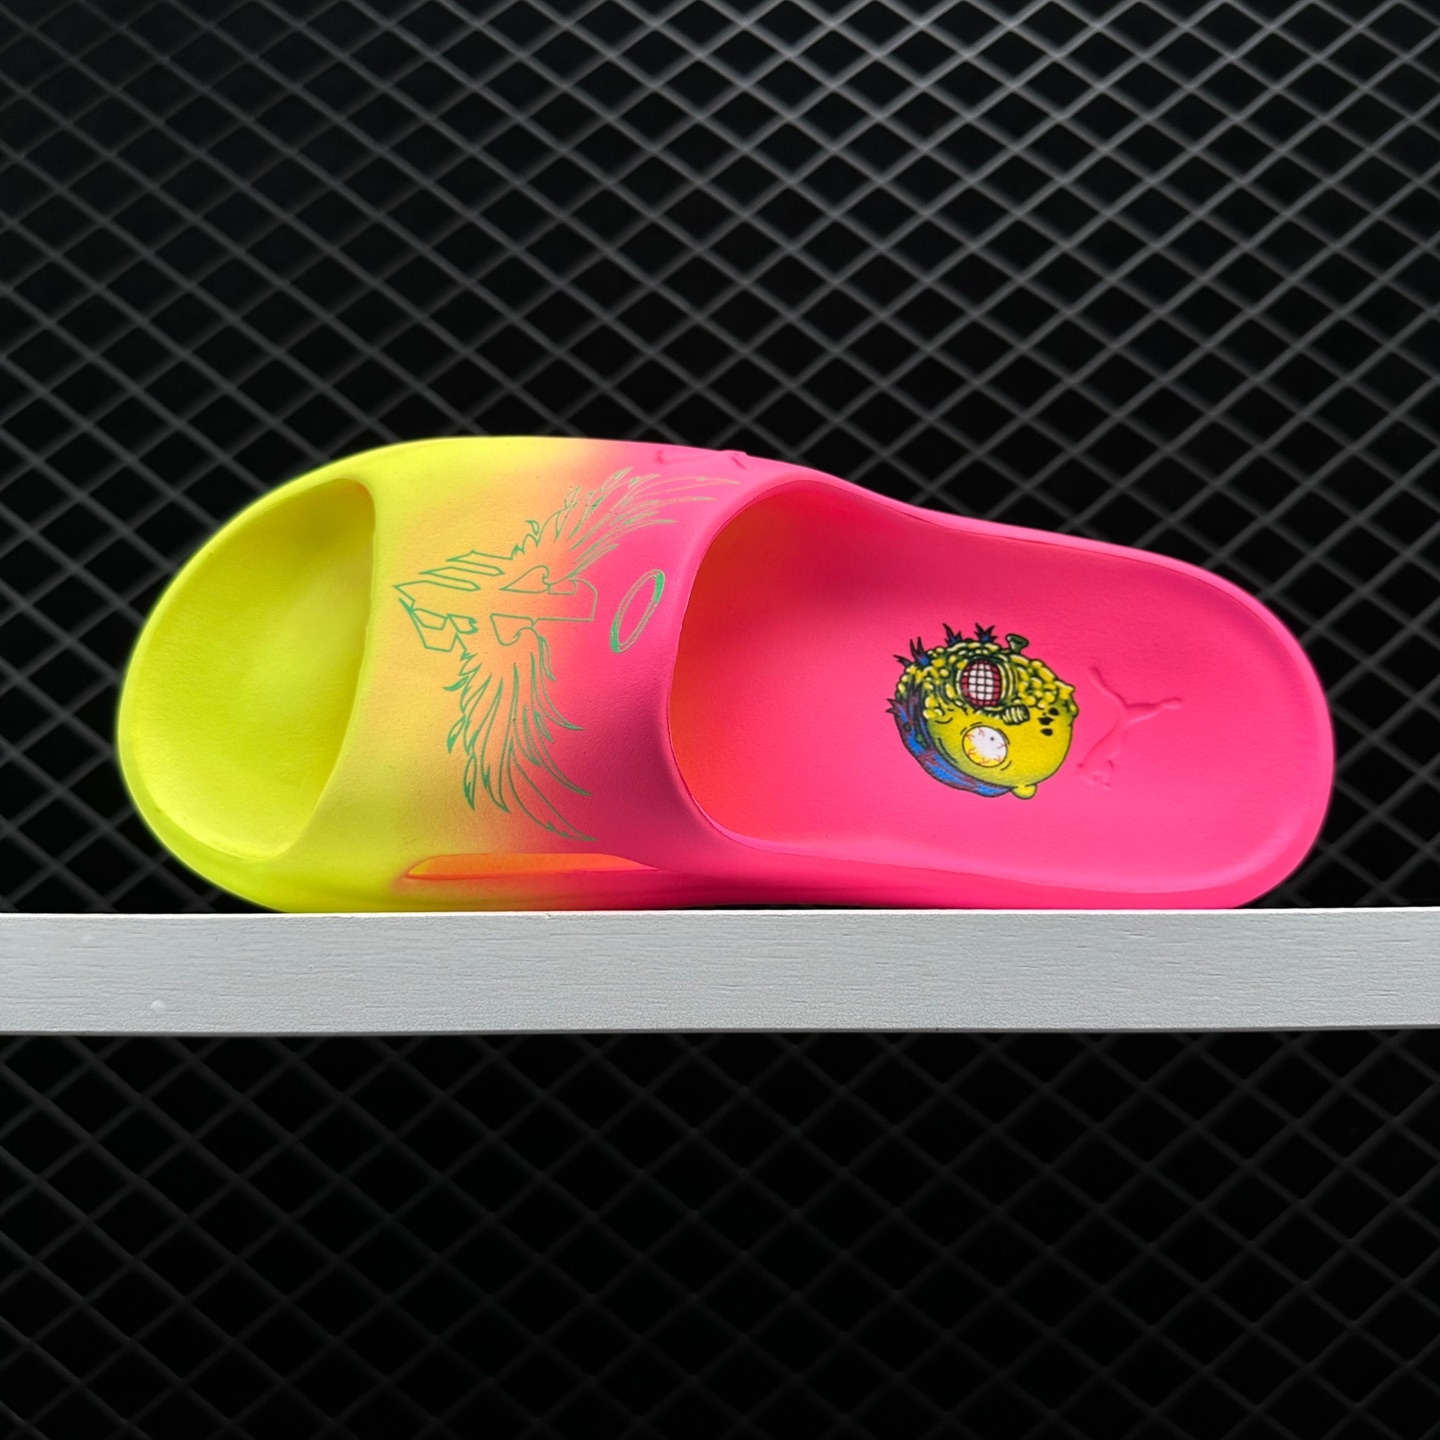 Puma Rick and Morty x LaMelo Ball Shibui Cat Slide 'Adventures' | Limited Editions